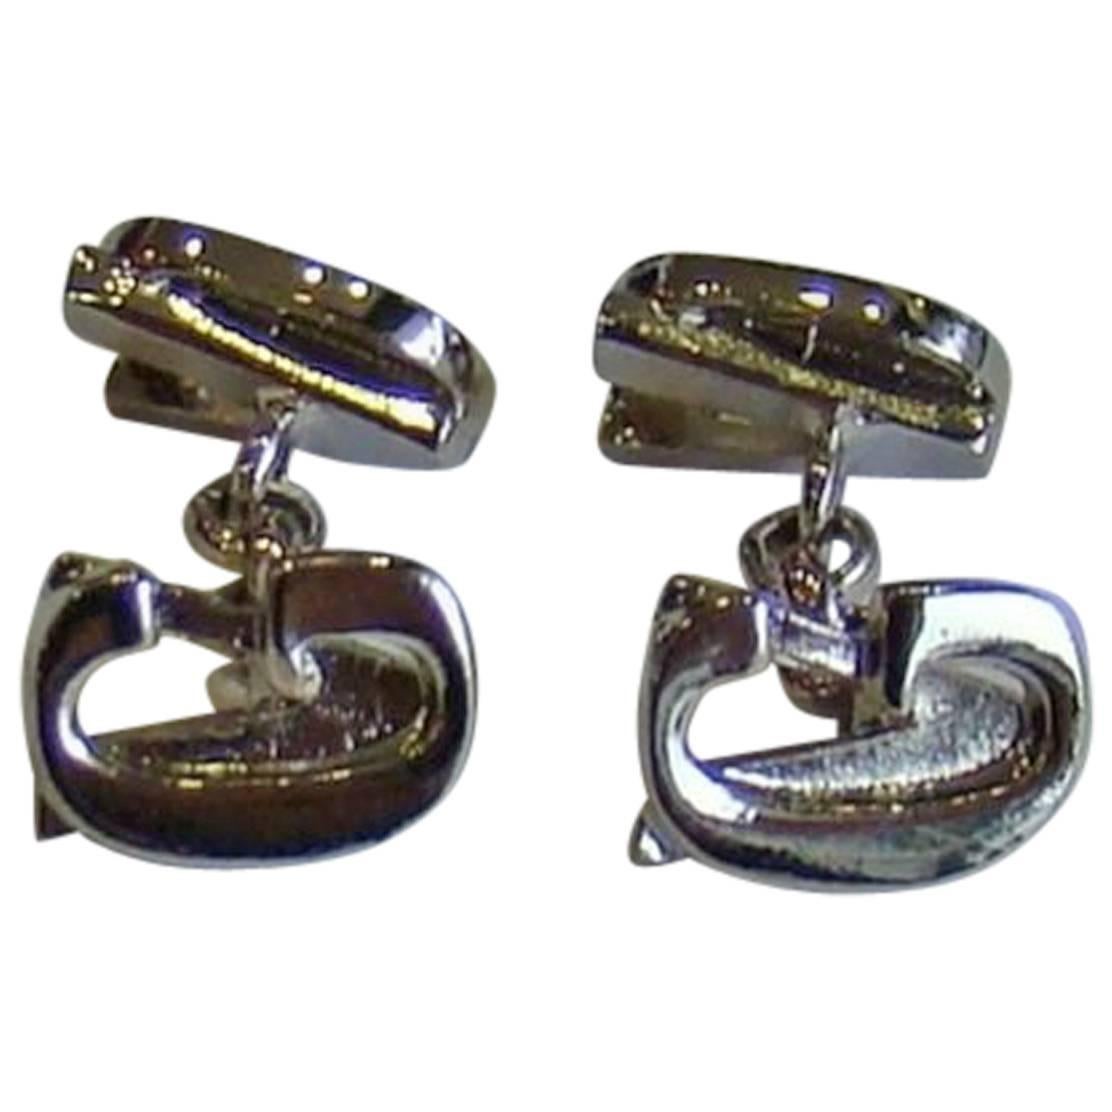 Gianni Versace Silver Cufflinks 1990's For Sale